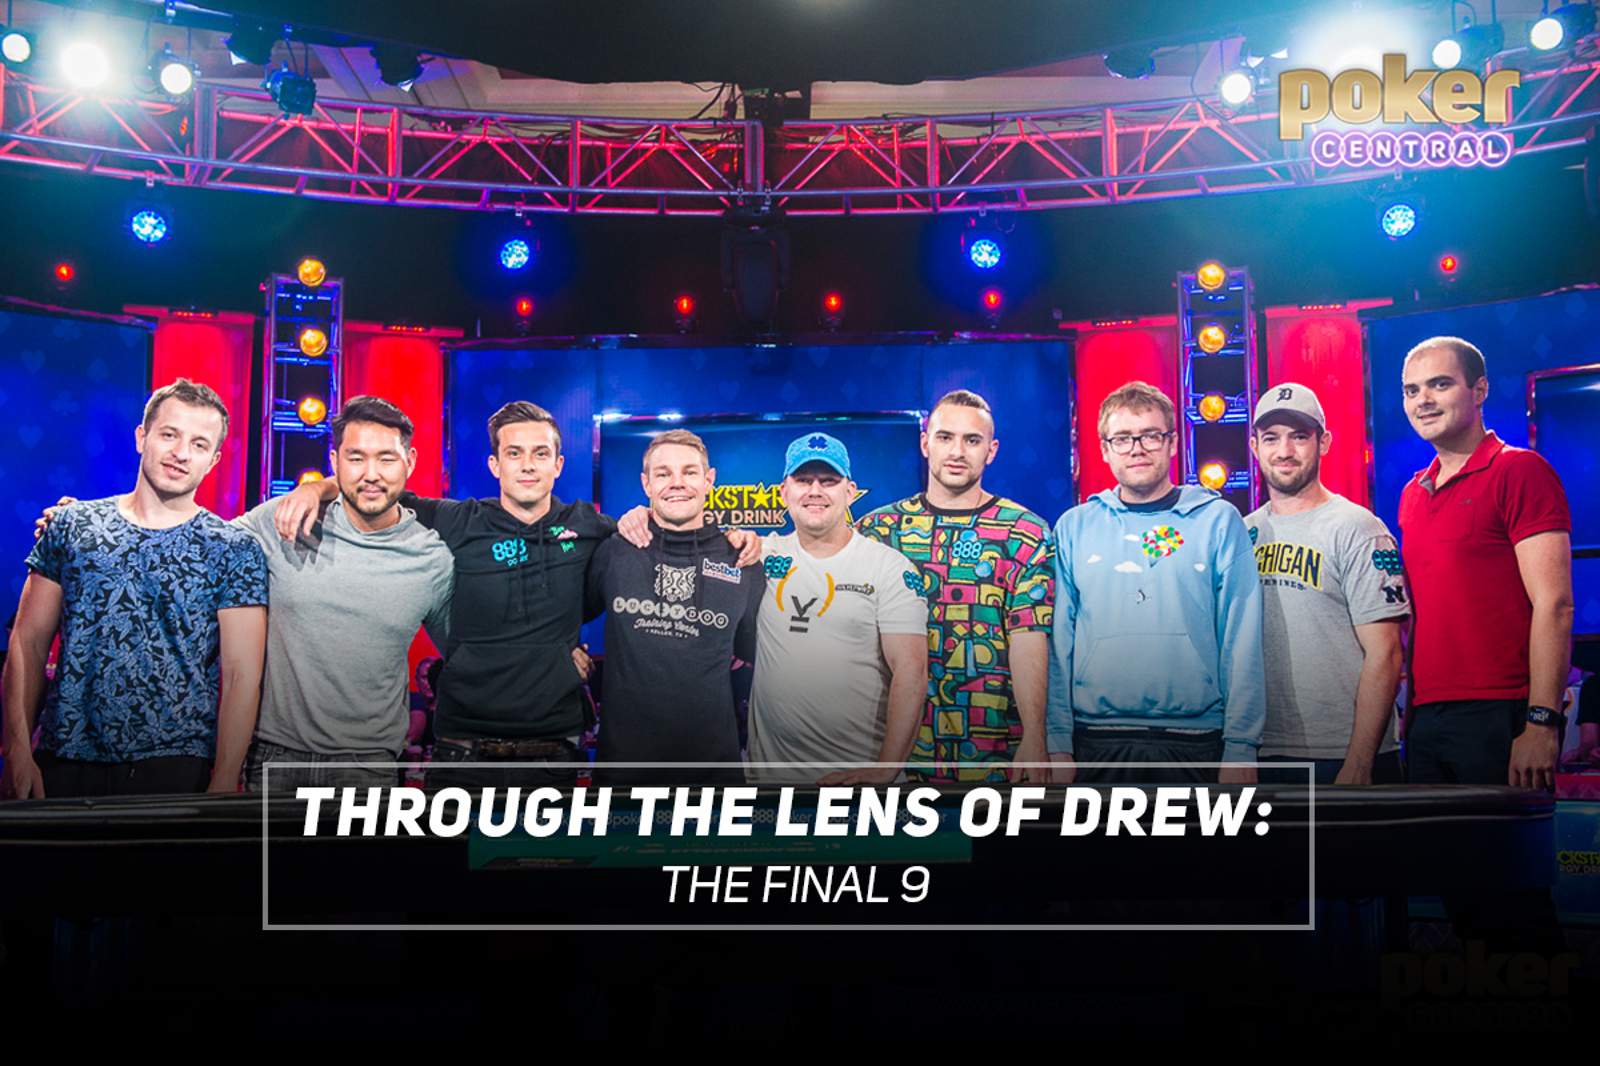 Through The Lens of Drew - The Final 9